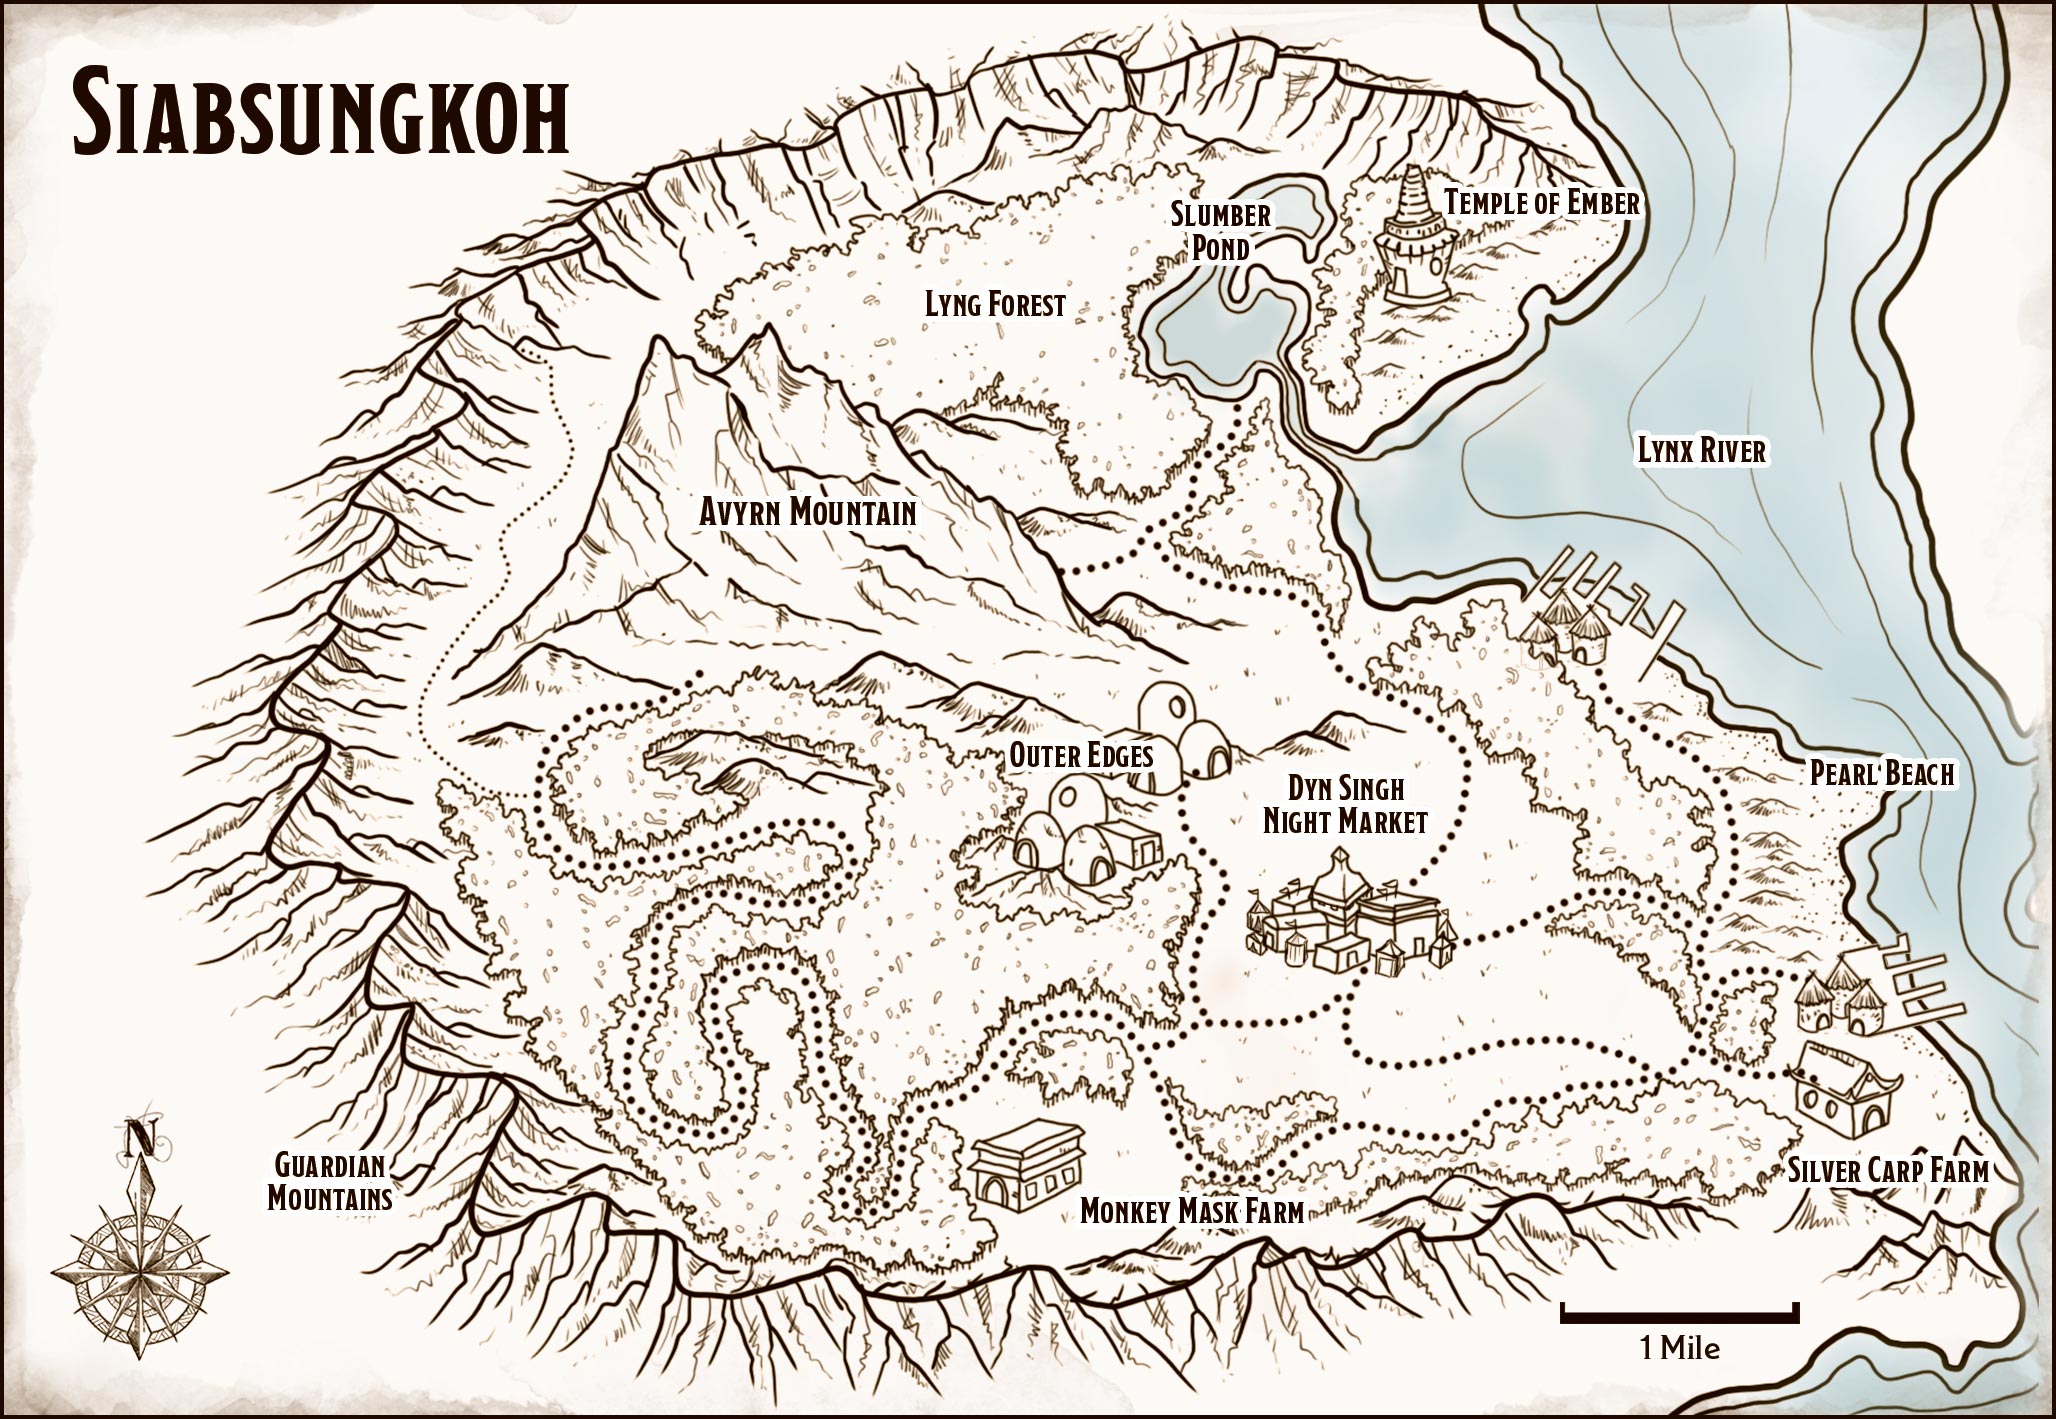 Map: Siabsungkoh - Journeys Through the Radiant Citadel (Wizards of the Coast)